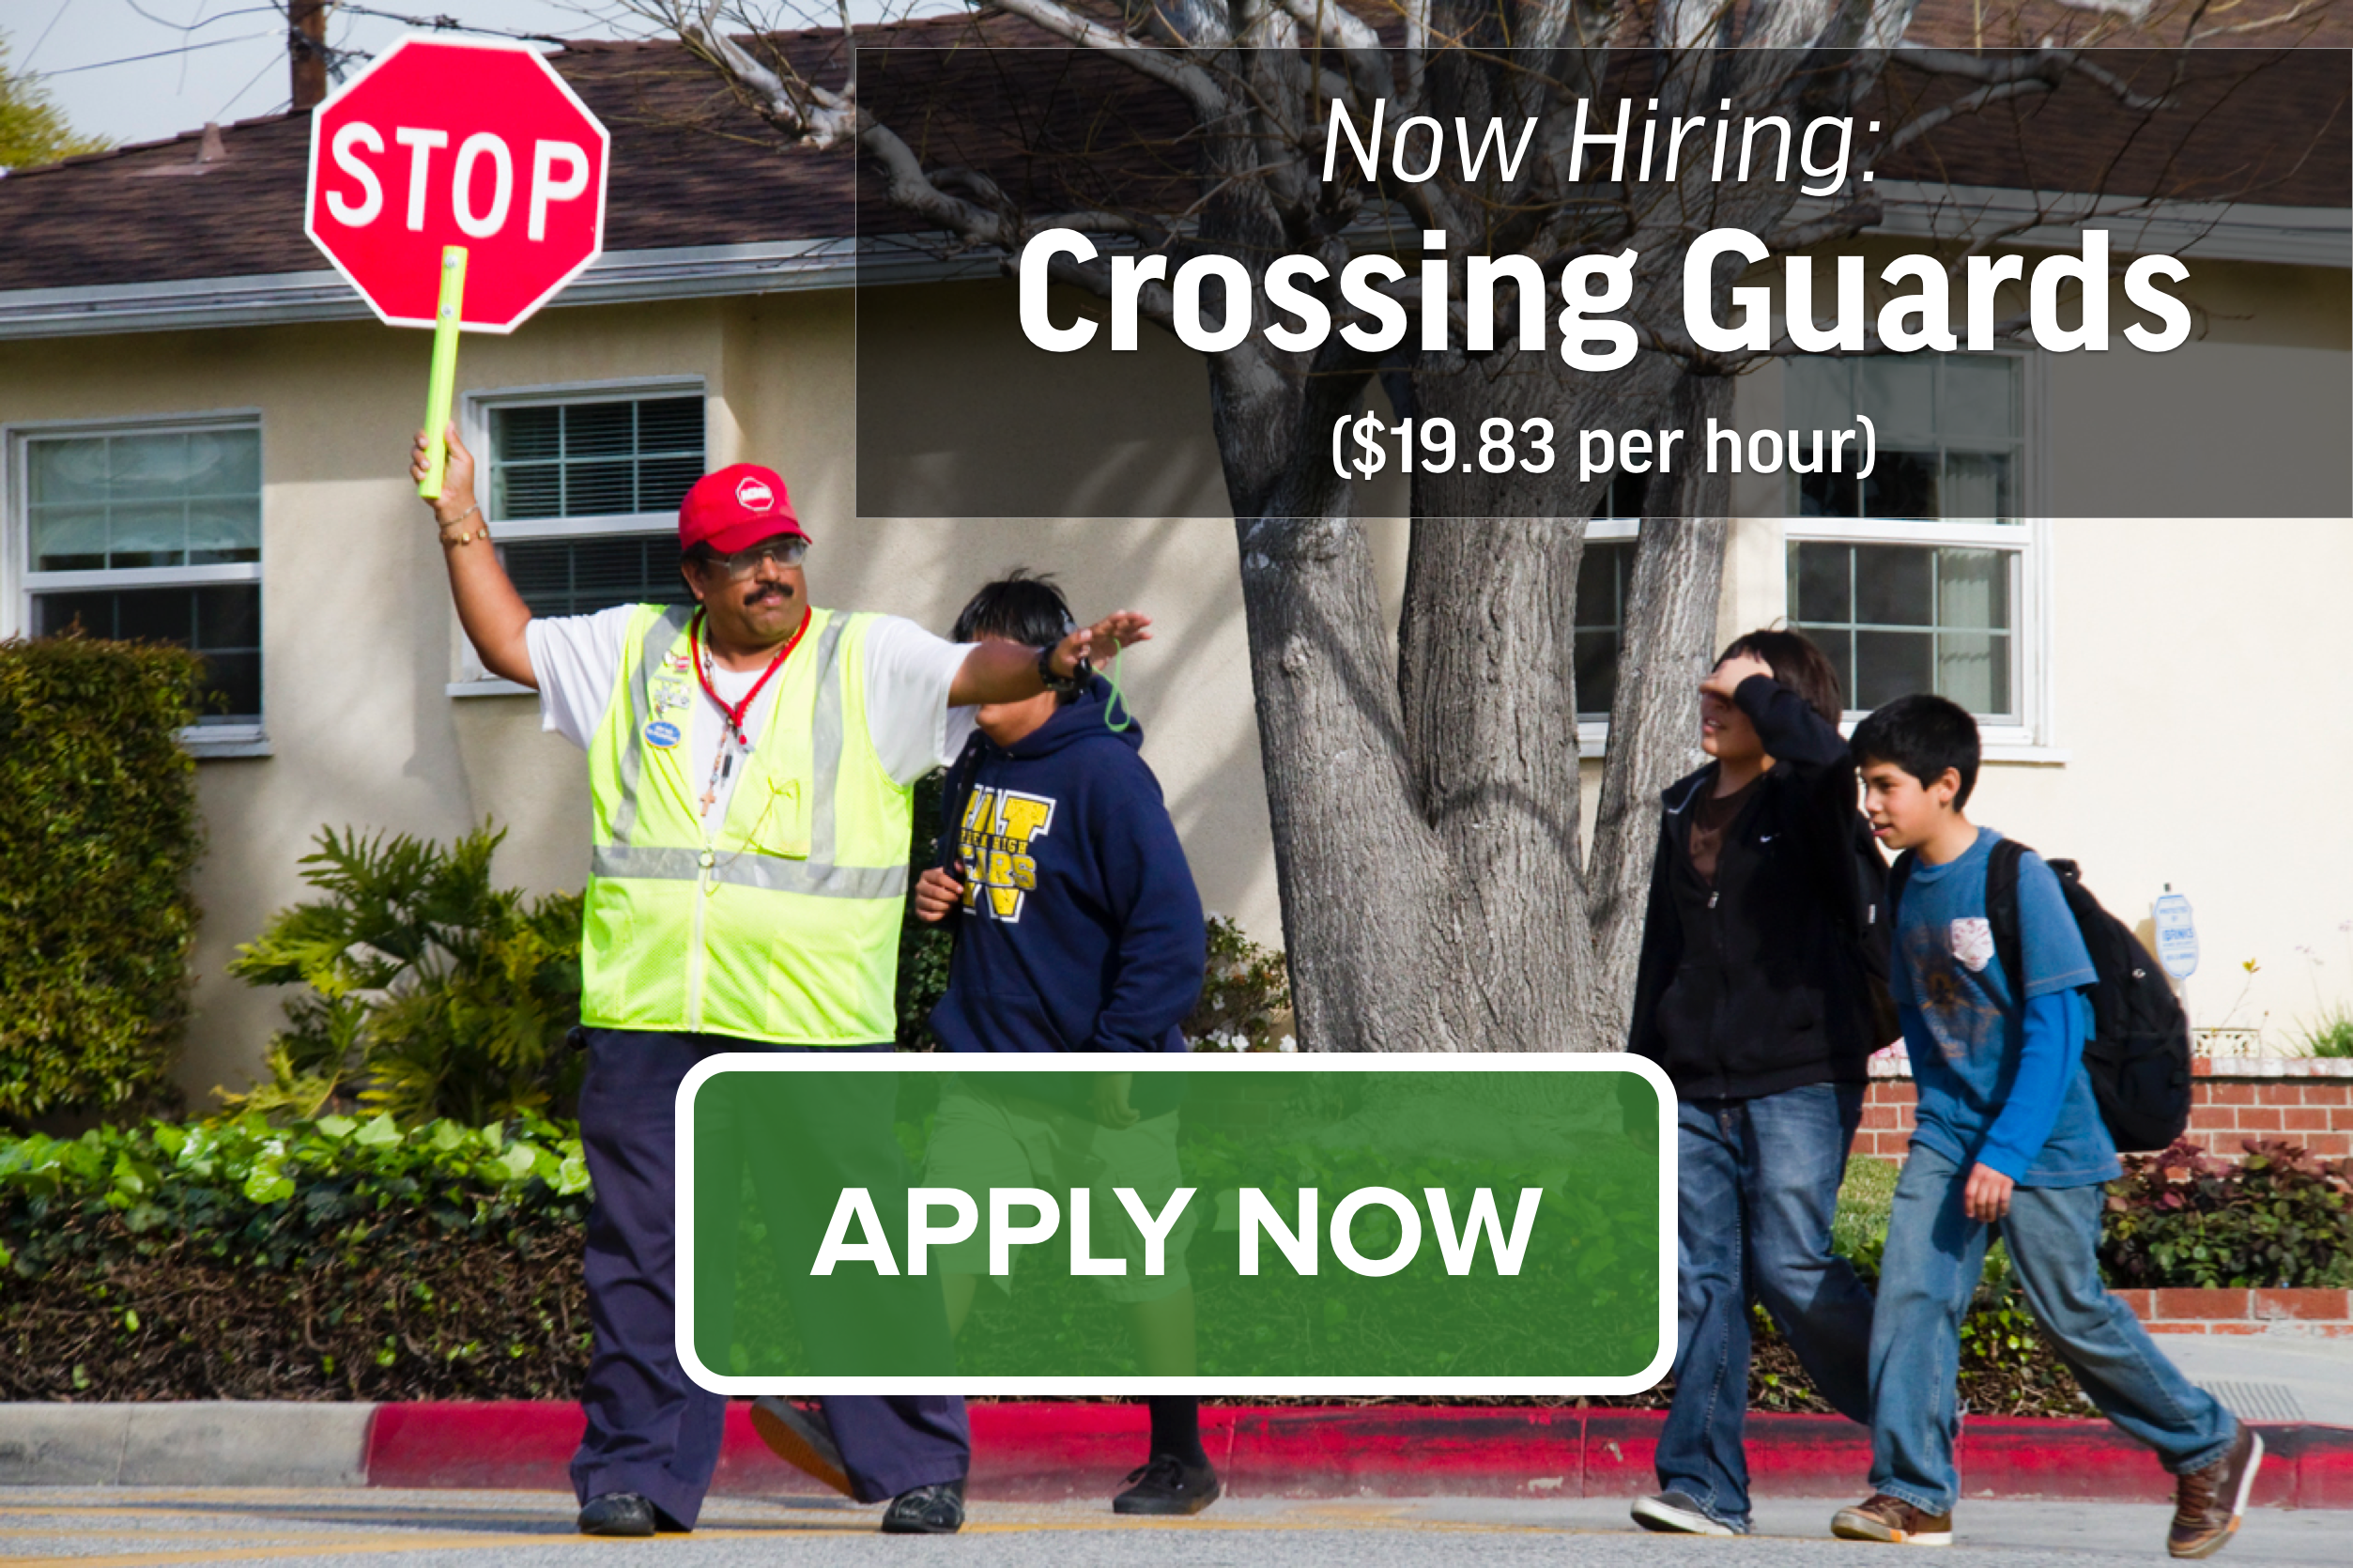 Now Hiring: Crossing Guards. Apply Now